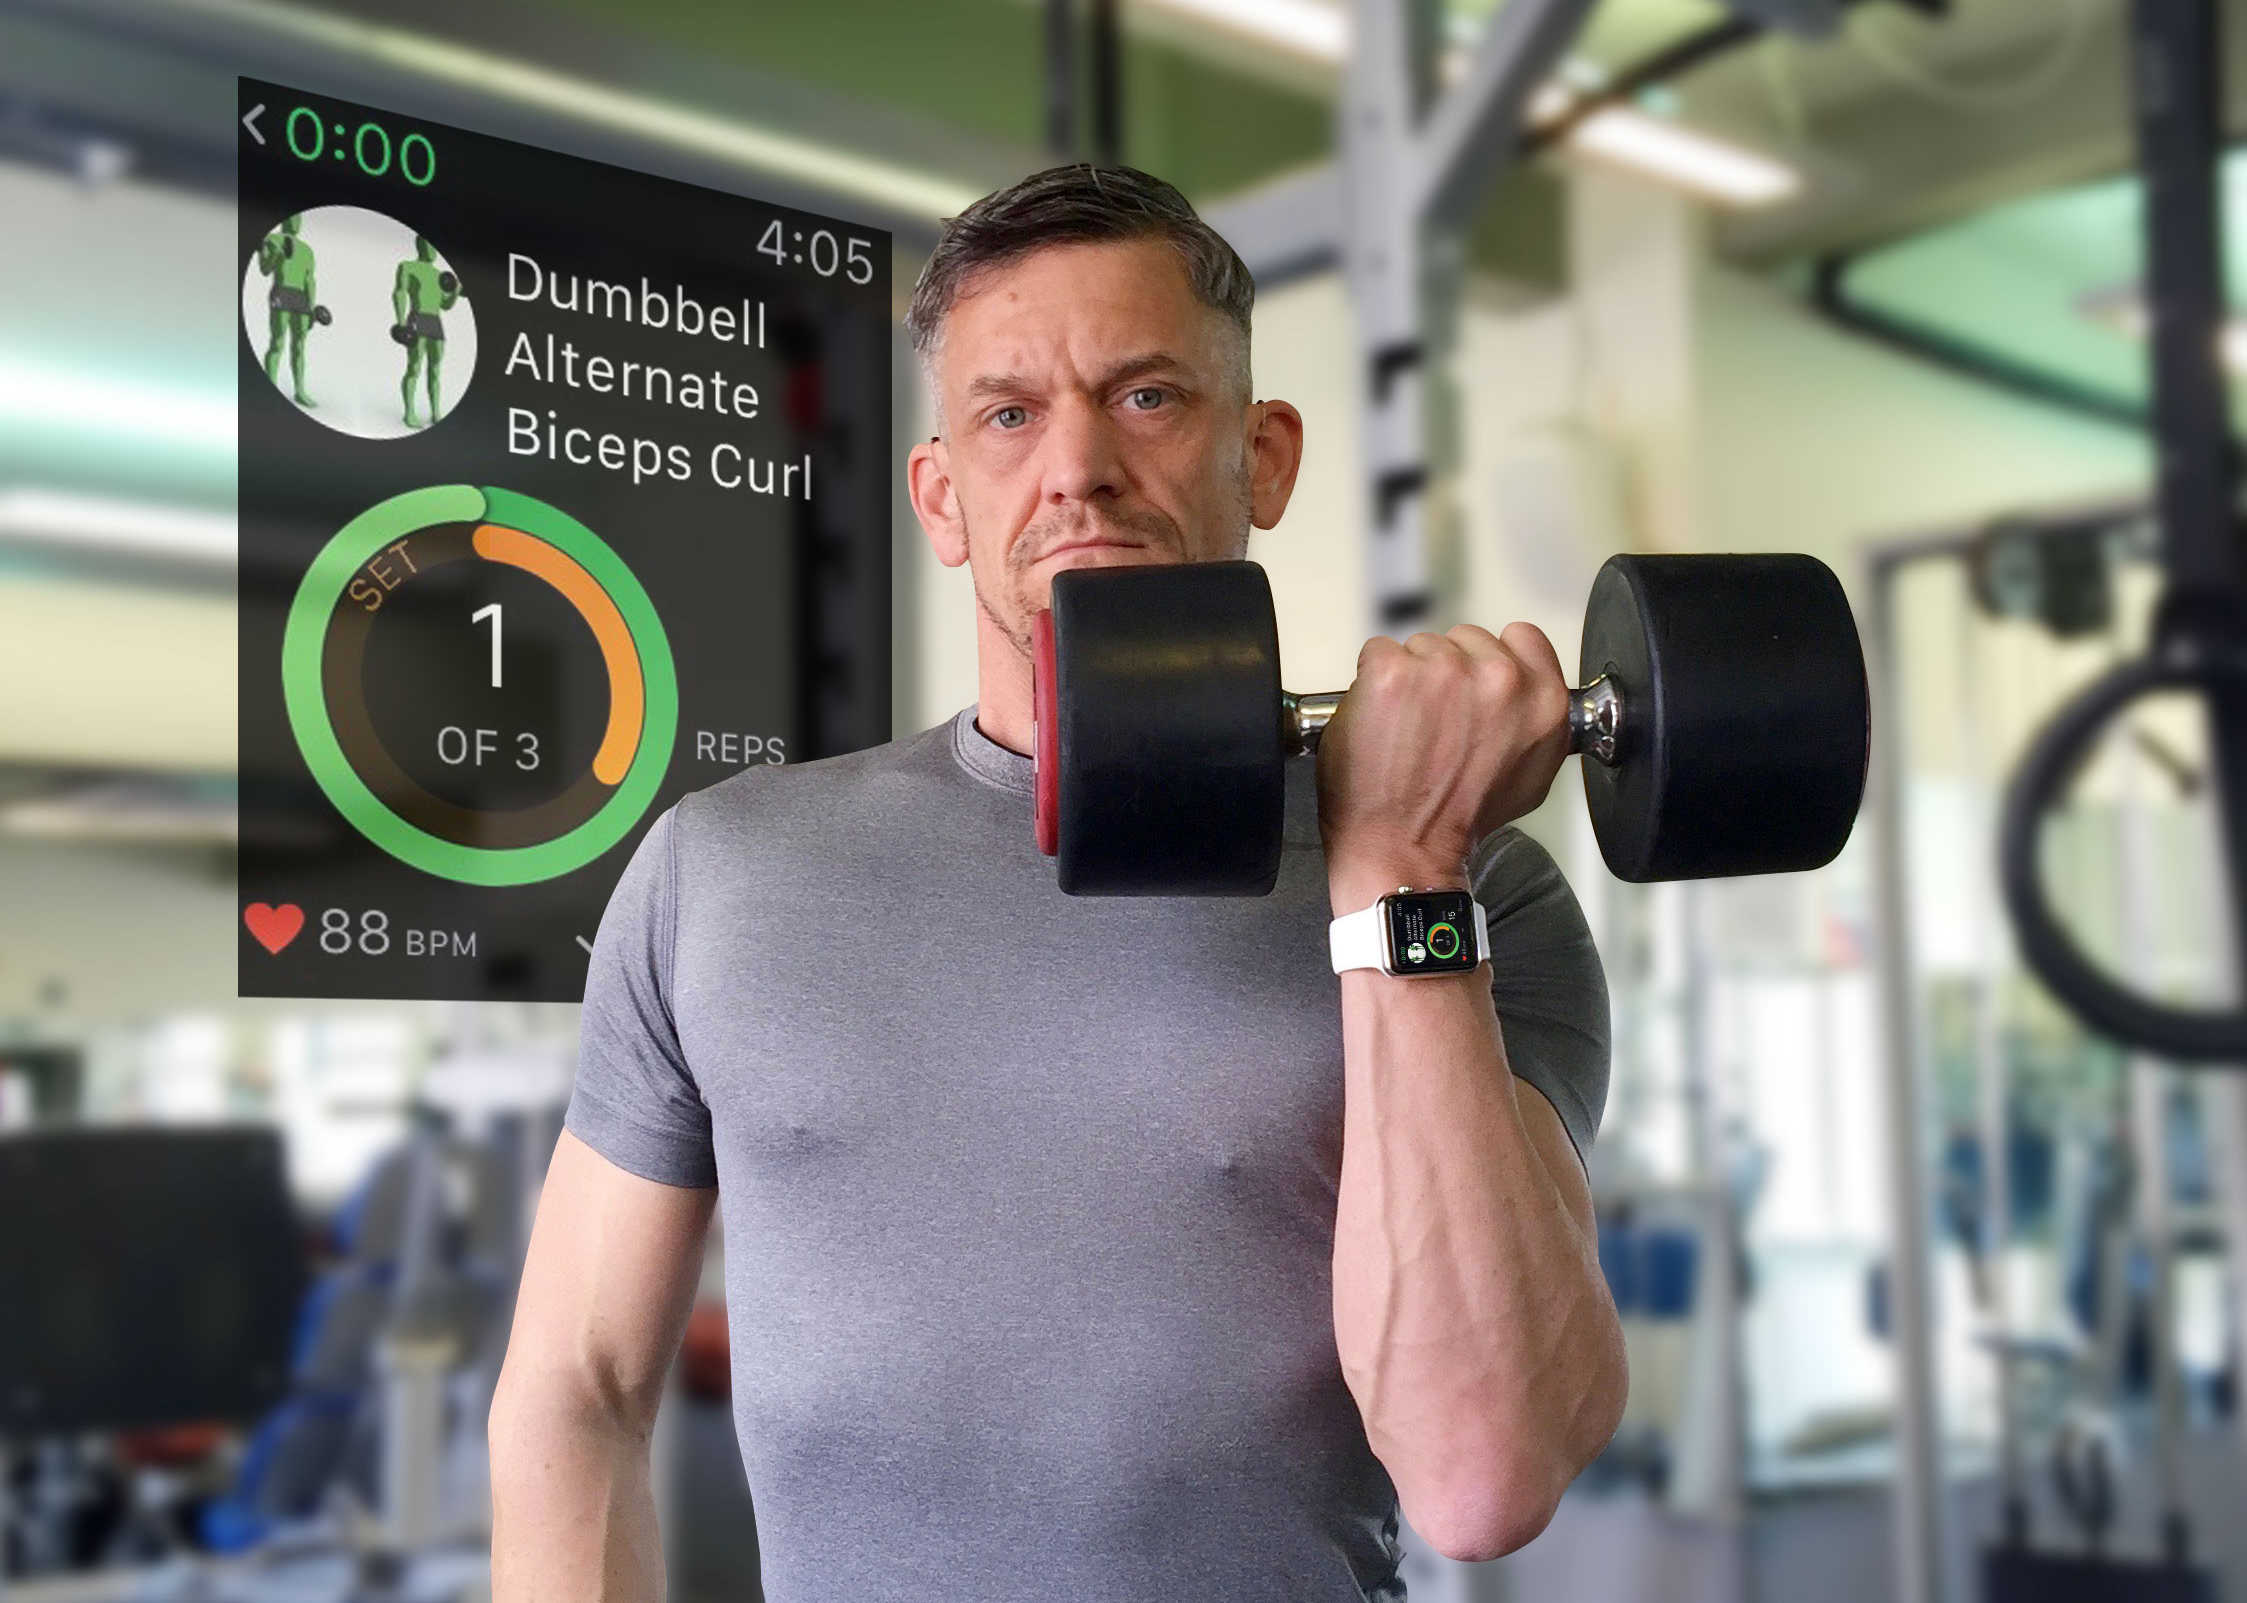 biograf notifikation Interesse How to get ripped with Apple Watch weightlifting apps